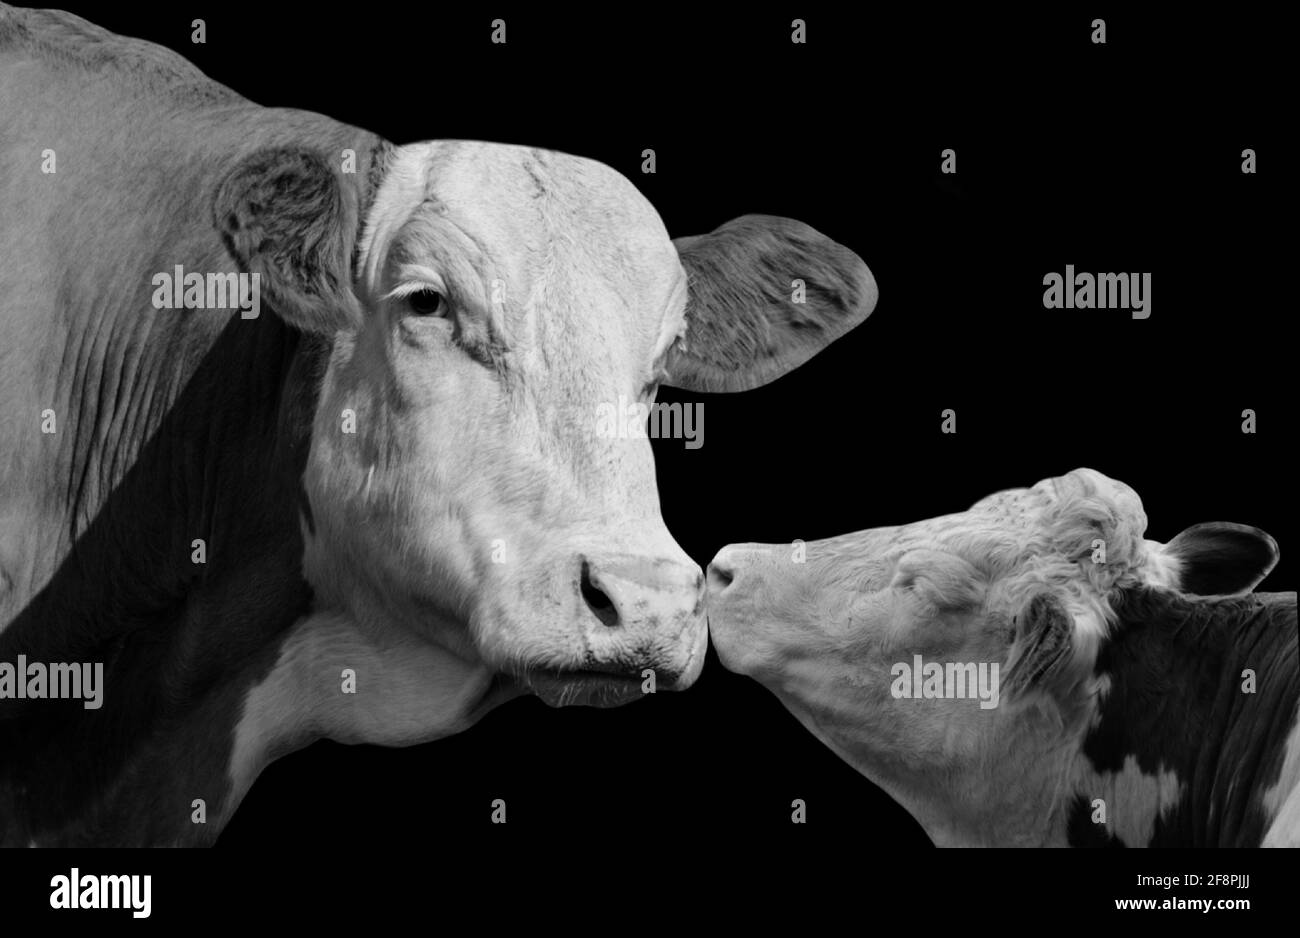 Mother And Baby Cow Face In The Black Background Stock Photo